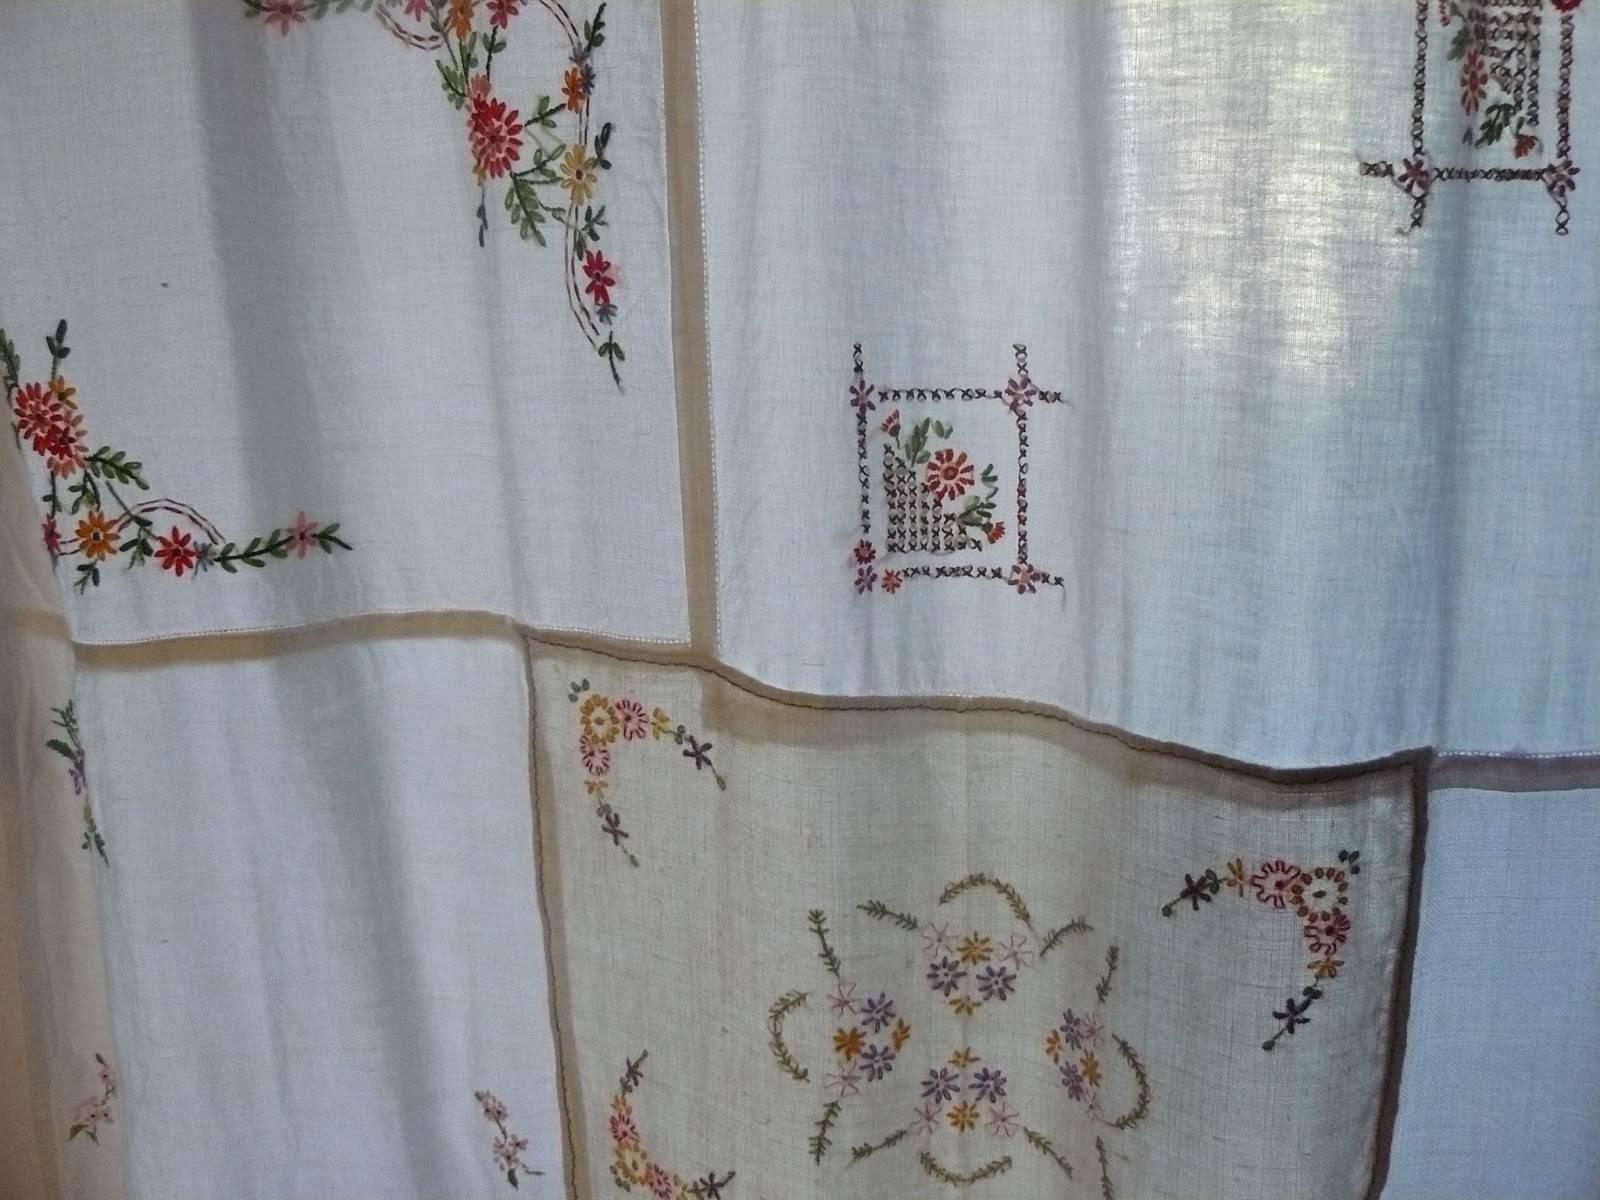 jumbles and pompoms: It's curtains for my vintage linens